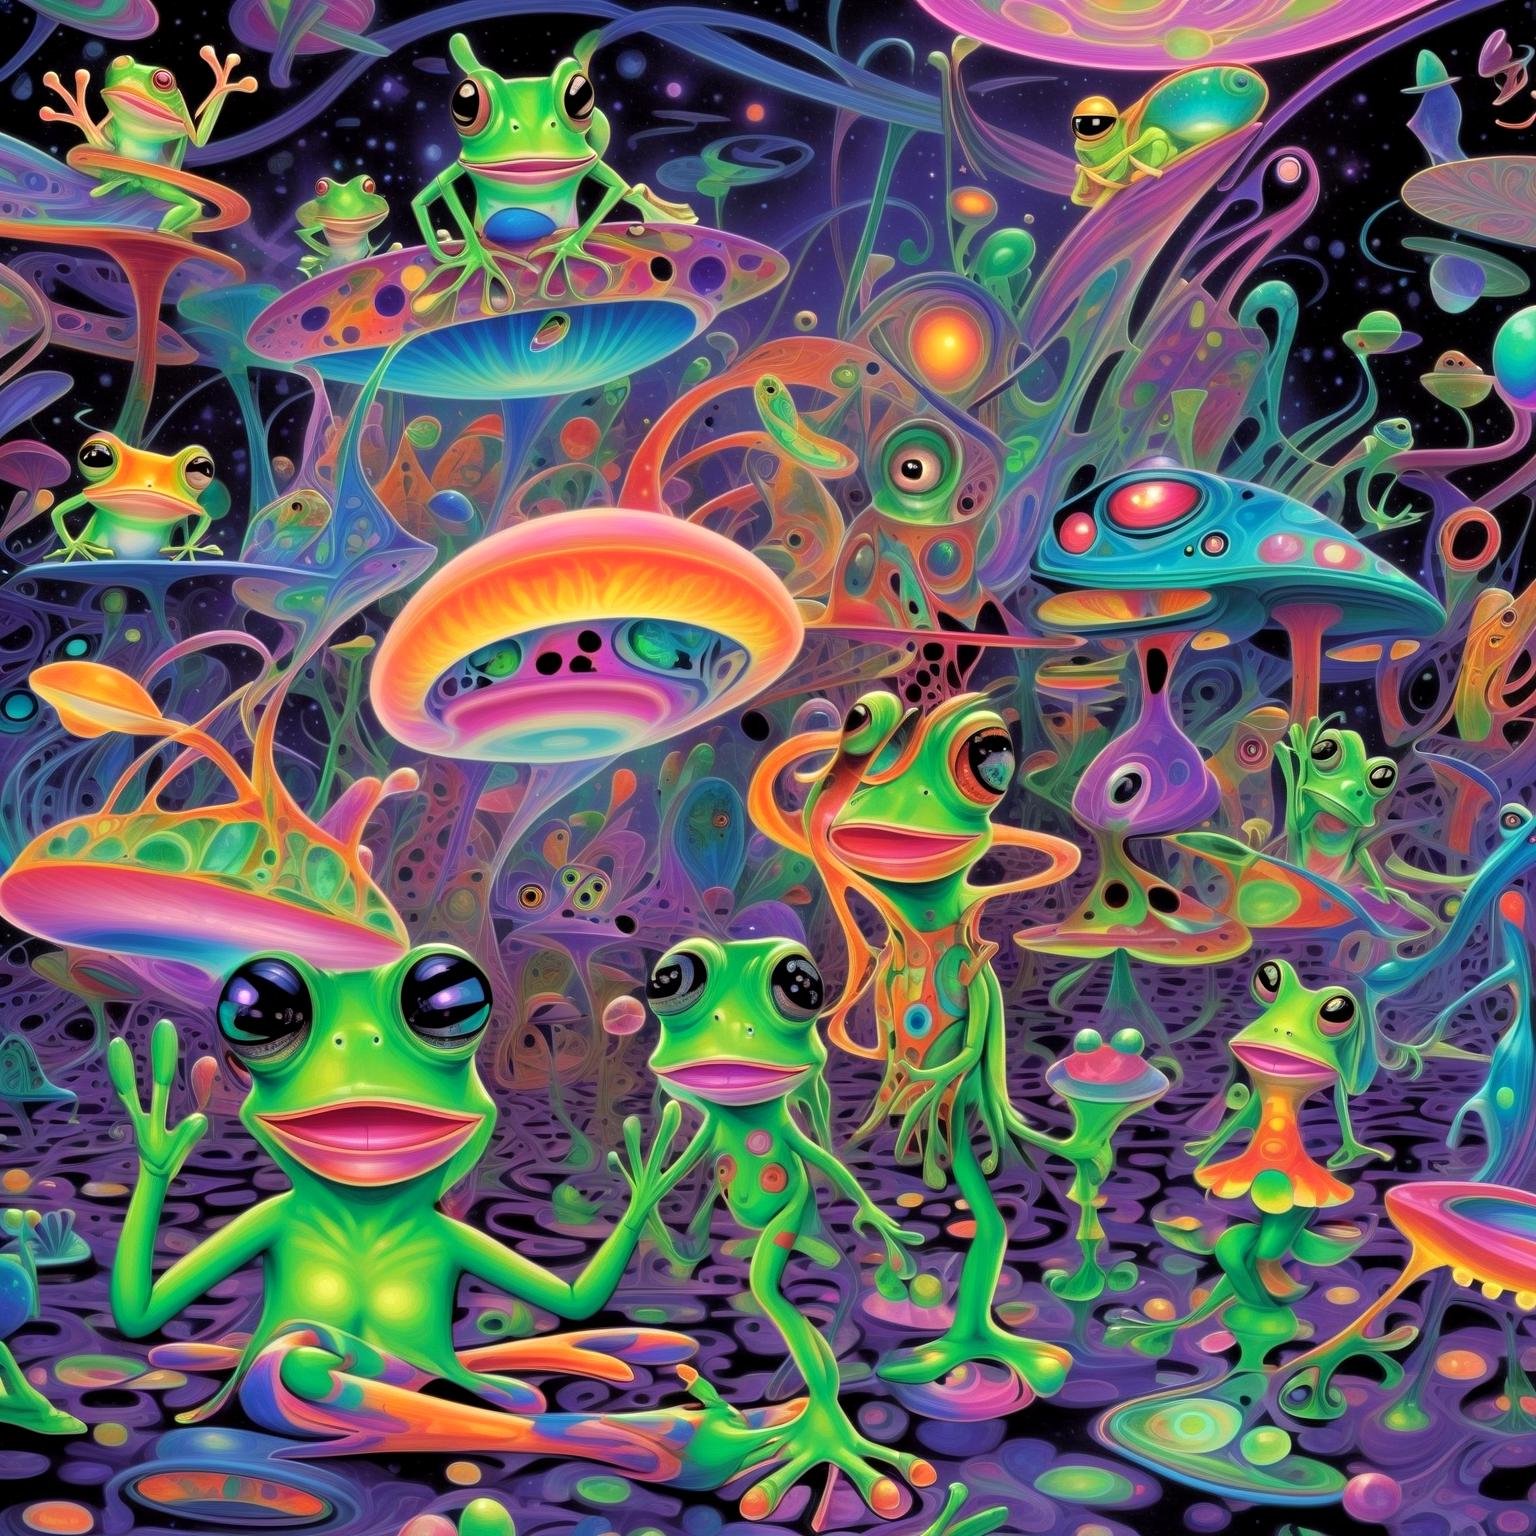 Aliens, a daring girl, and frogs indulge in mind-altering substances, creating avant-garde art with each hallucinogenic stroke. Reality twists into abstract patterns, and frogs emanate psychedelic colors. The group becomes living art, exploring the boundaries of imagination and creativity in a world of surreal proportions.,in style of(bangerooo:1.15), ,